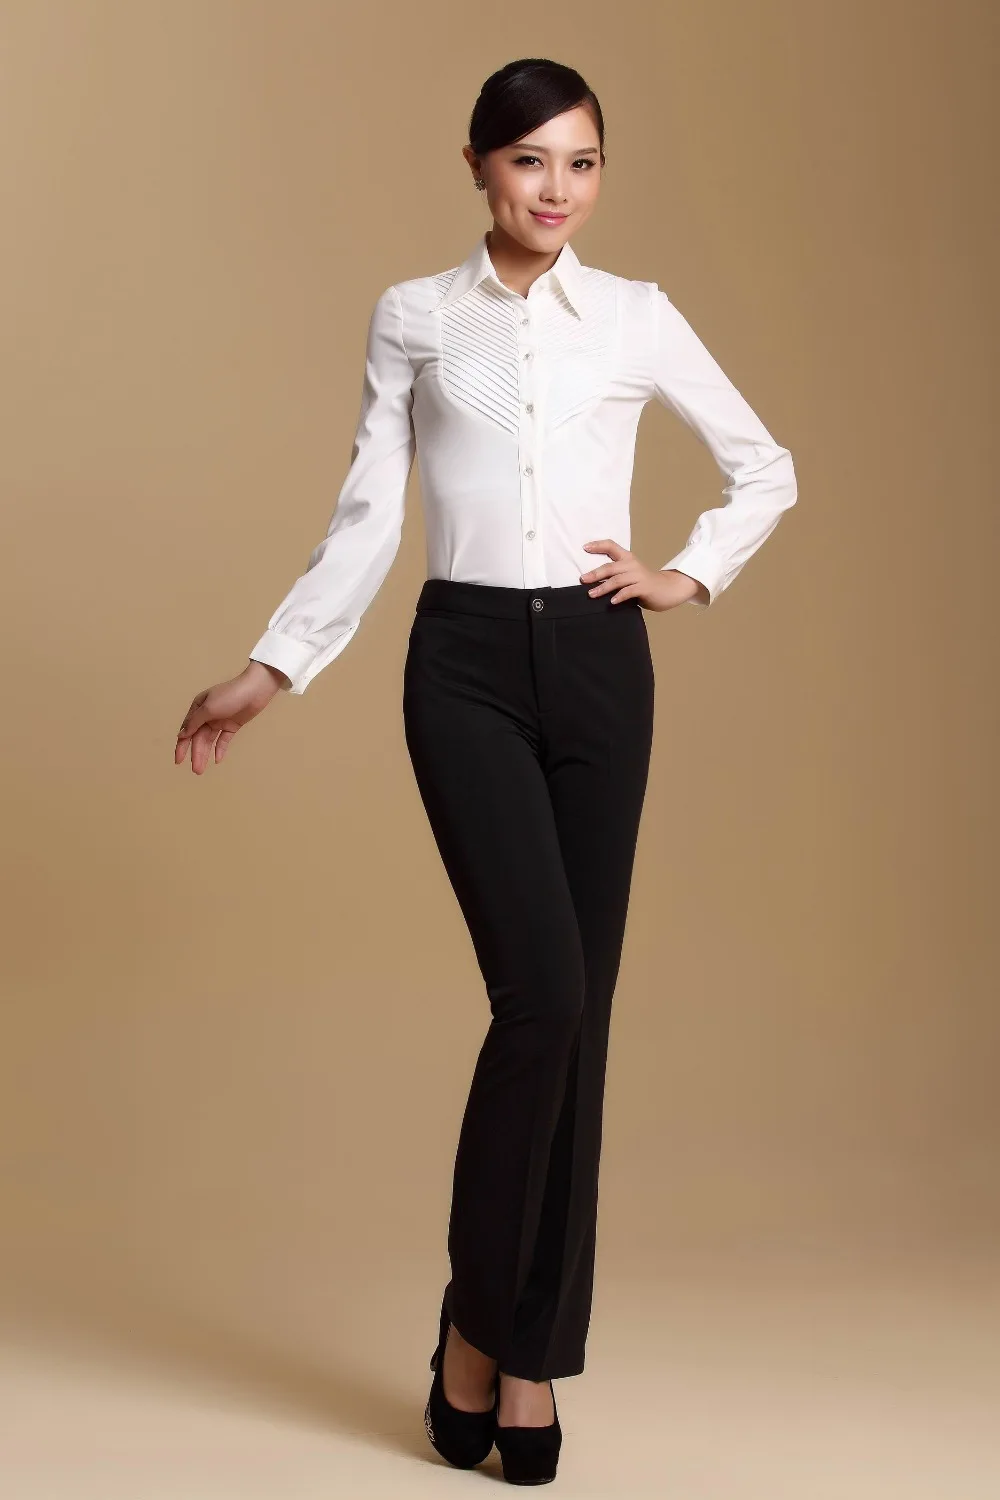 shirts to wear with black dress pants